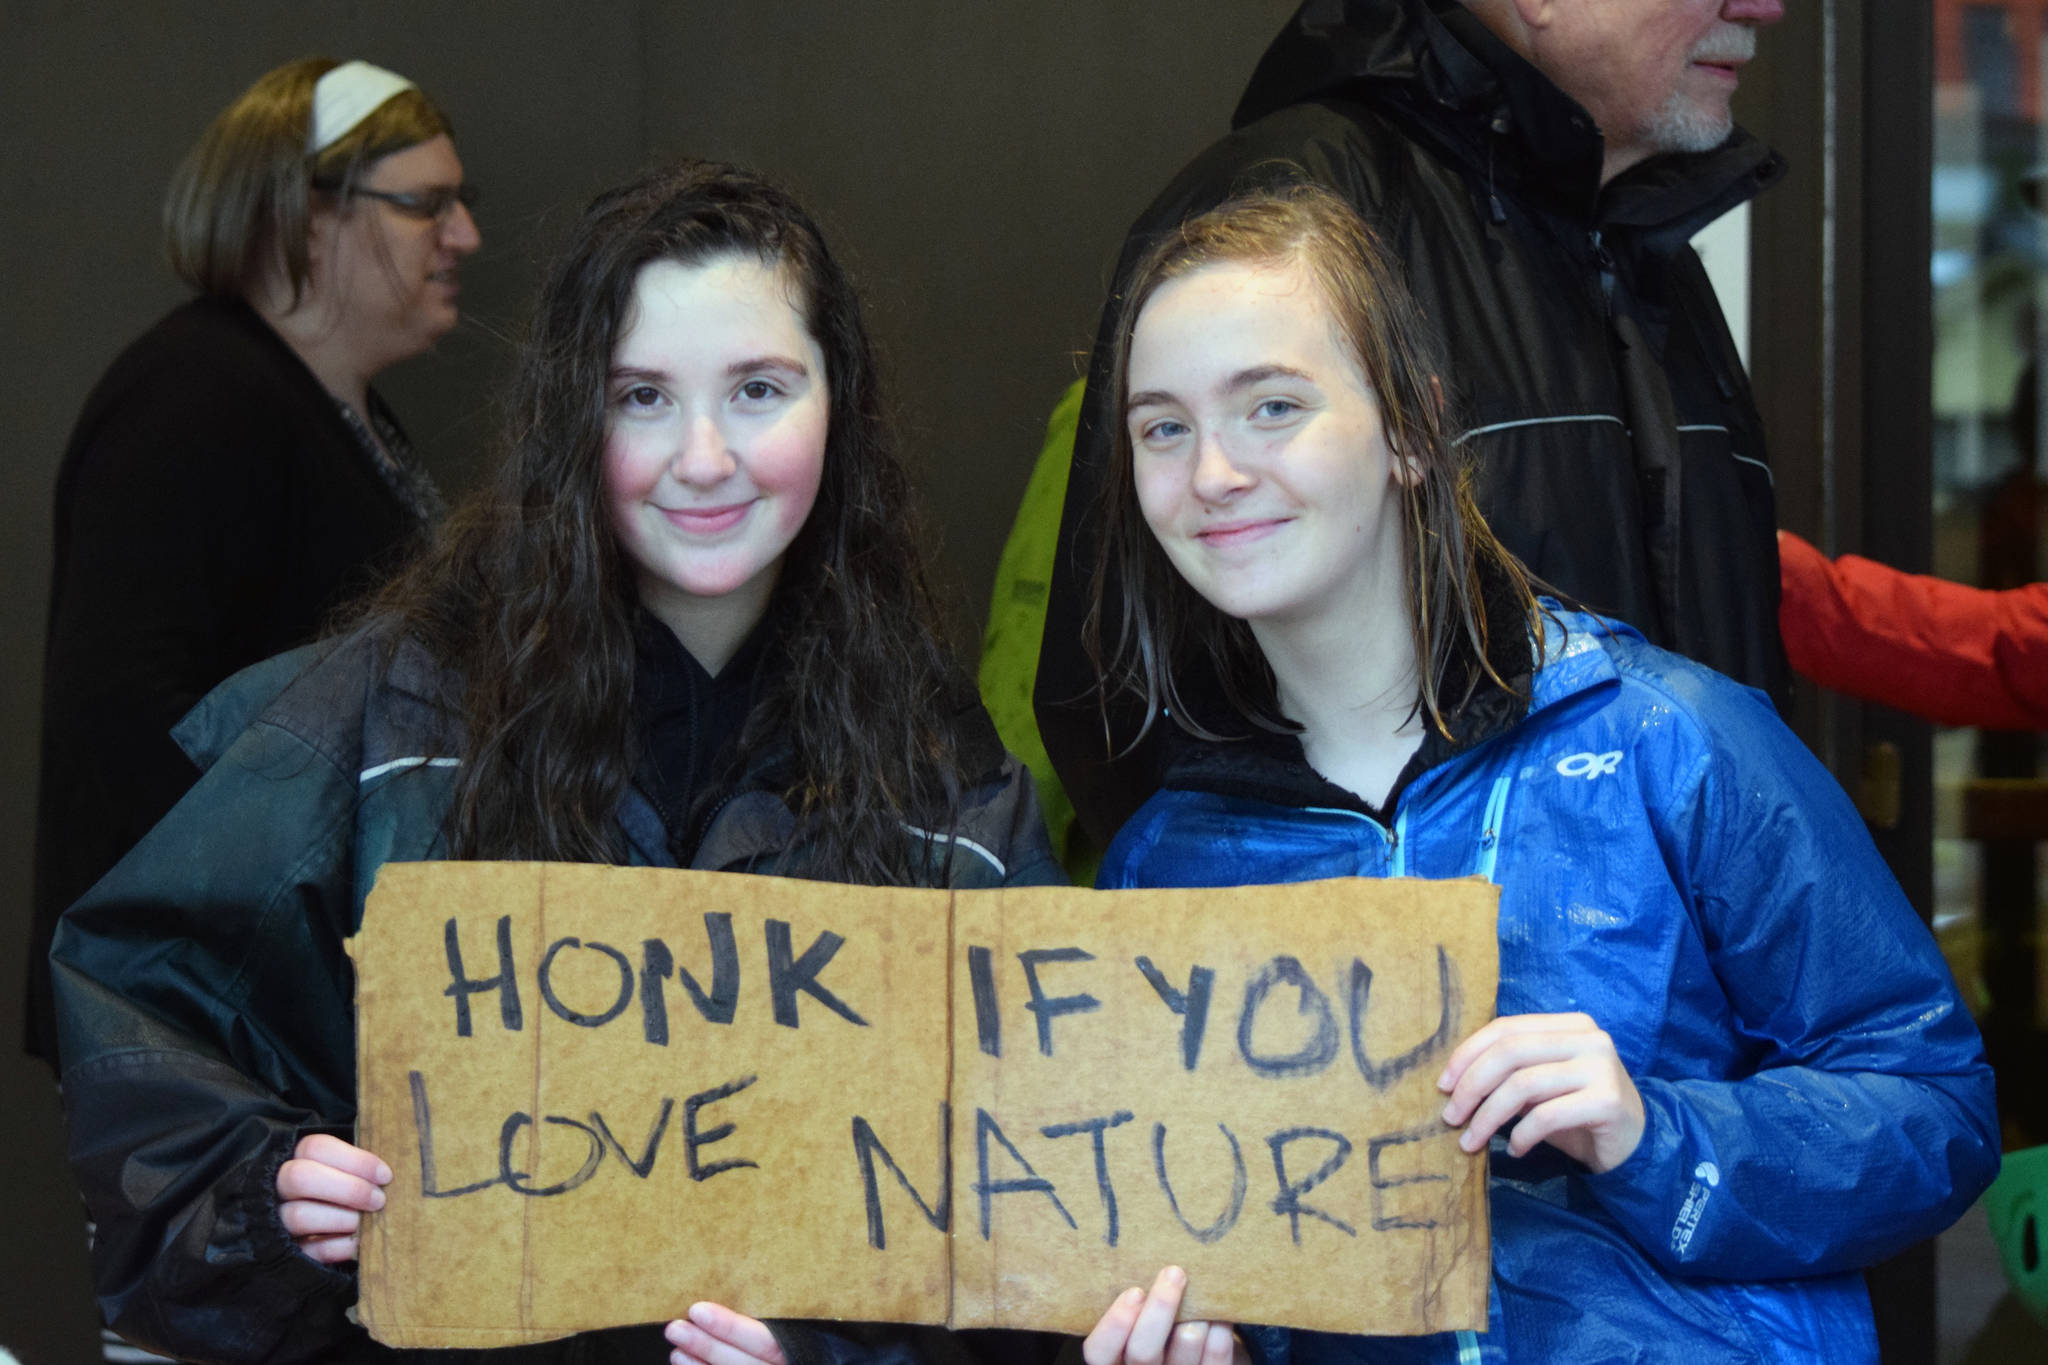 Emma Magnusson, 15, a homeschool student, and Lera Jimmerson, 16, of Thunder Mountain High School, outside the State Office Building on Friday, Sept. 20, 2019. (Peter Segall | Juneau Empire)